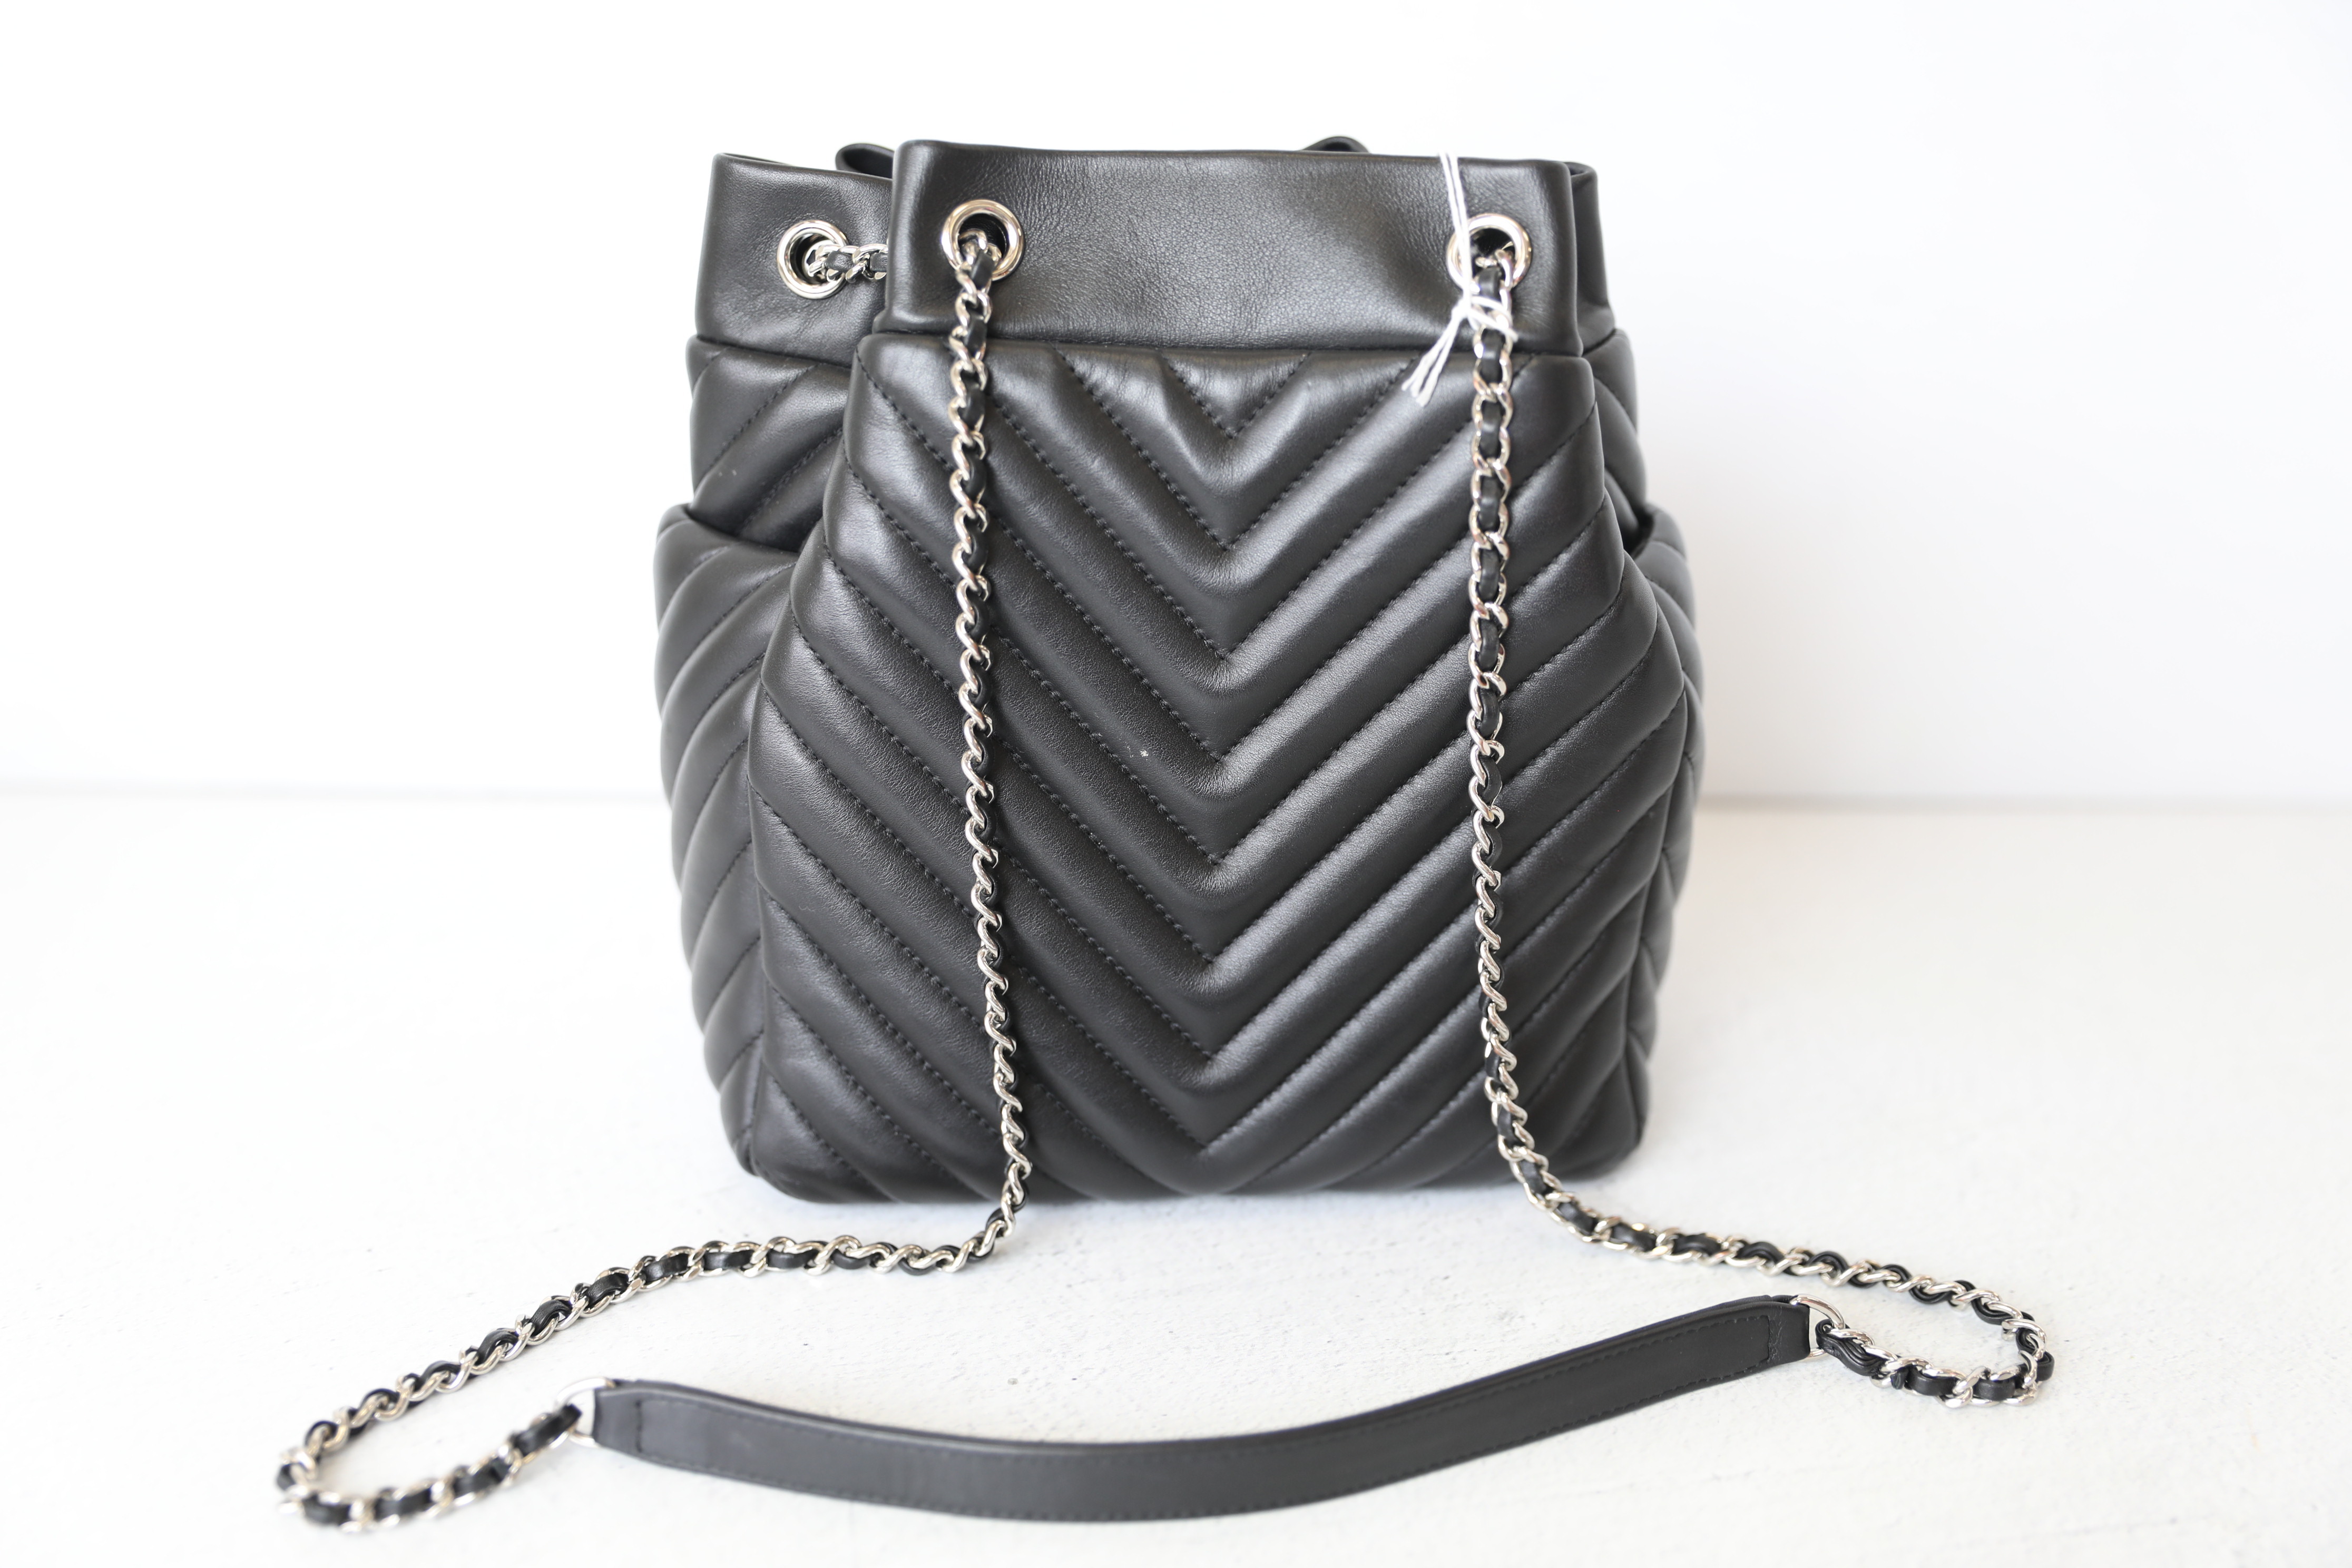 Chanel Urban Spirit Drawstring Chevron Quilted Bucket Bag, Black Calfskin  with Silver Hardware, Preowned No Dustbag WA001